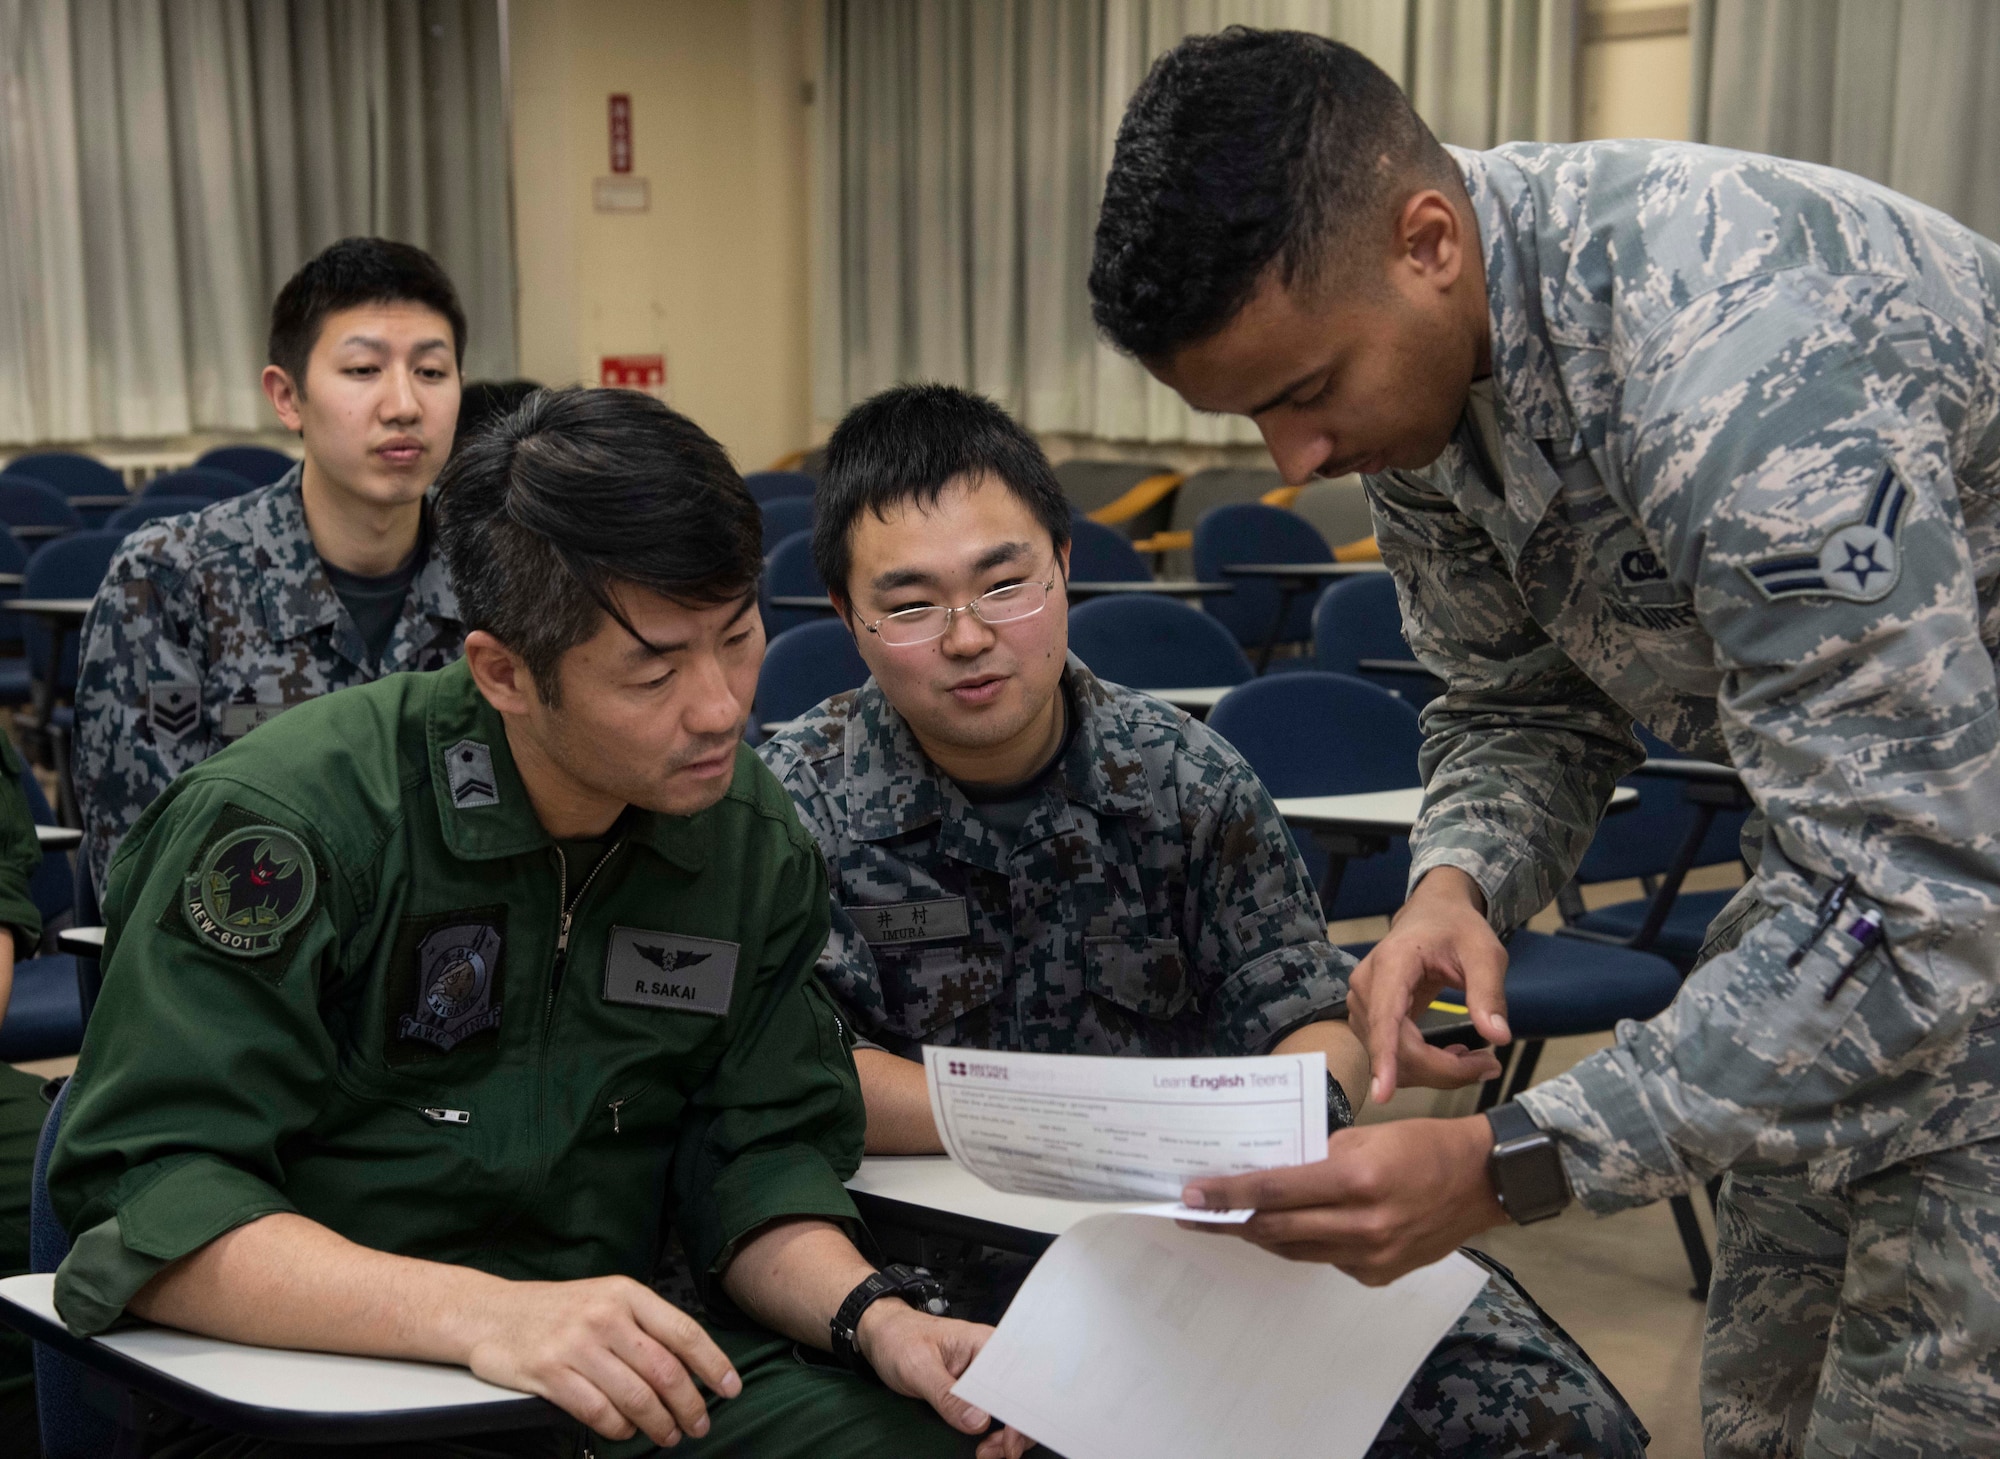 Japan Air Self-Defense Force Tech. Sgt. Ryouta Sakai, left, a 601st Squadron, Airspace Warning Control Wing operator and Airman 1st Class Taichi Imura, center, a 601st SQ AWC Wing dispatcher, receive assistance from U.S. Air Force Airman 1st Class William Raley, right, a 610th Air Control Flight weapons director technician, during an English class at Misawa Air Base, Japan, March 7, 2019. Raley said his English classes help break down language barriers between the two teams, enabling them to work more cohesively. (U.S. Air Force photo by Senior Airman Sadie Colbert)